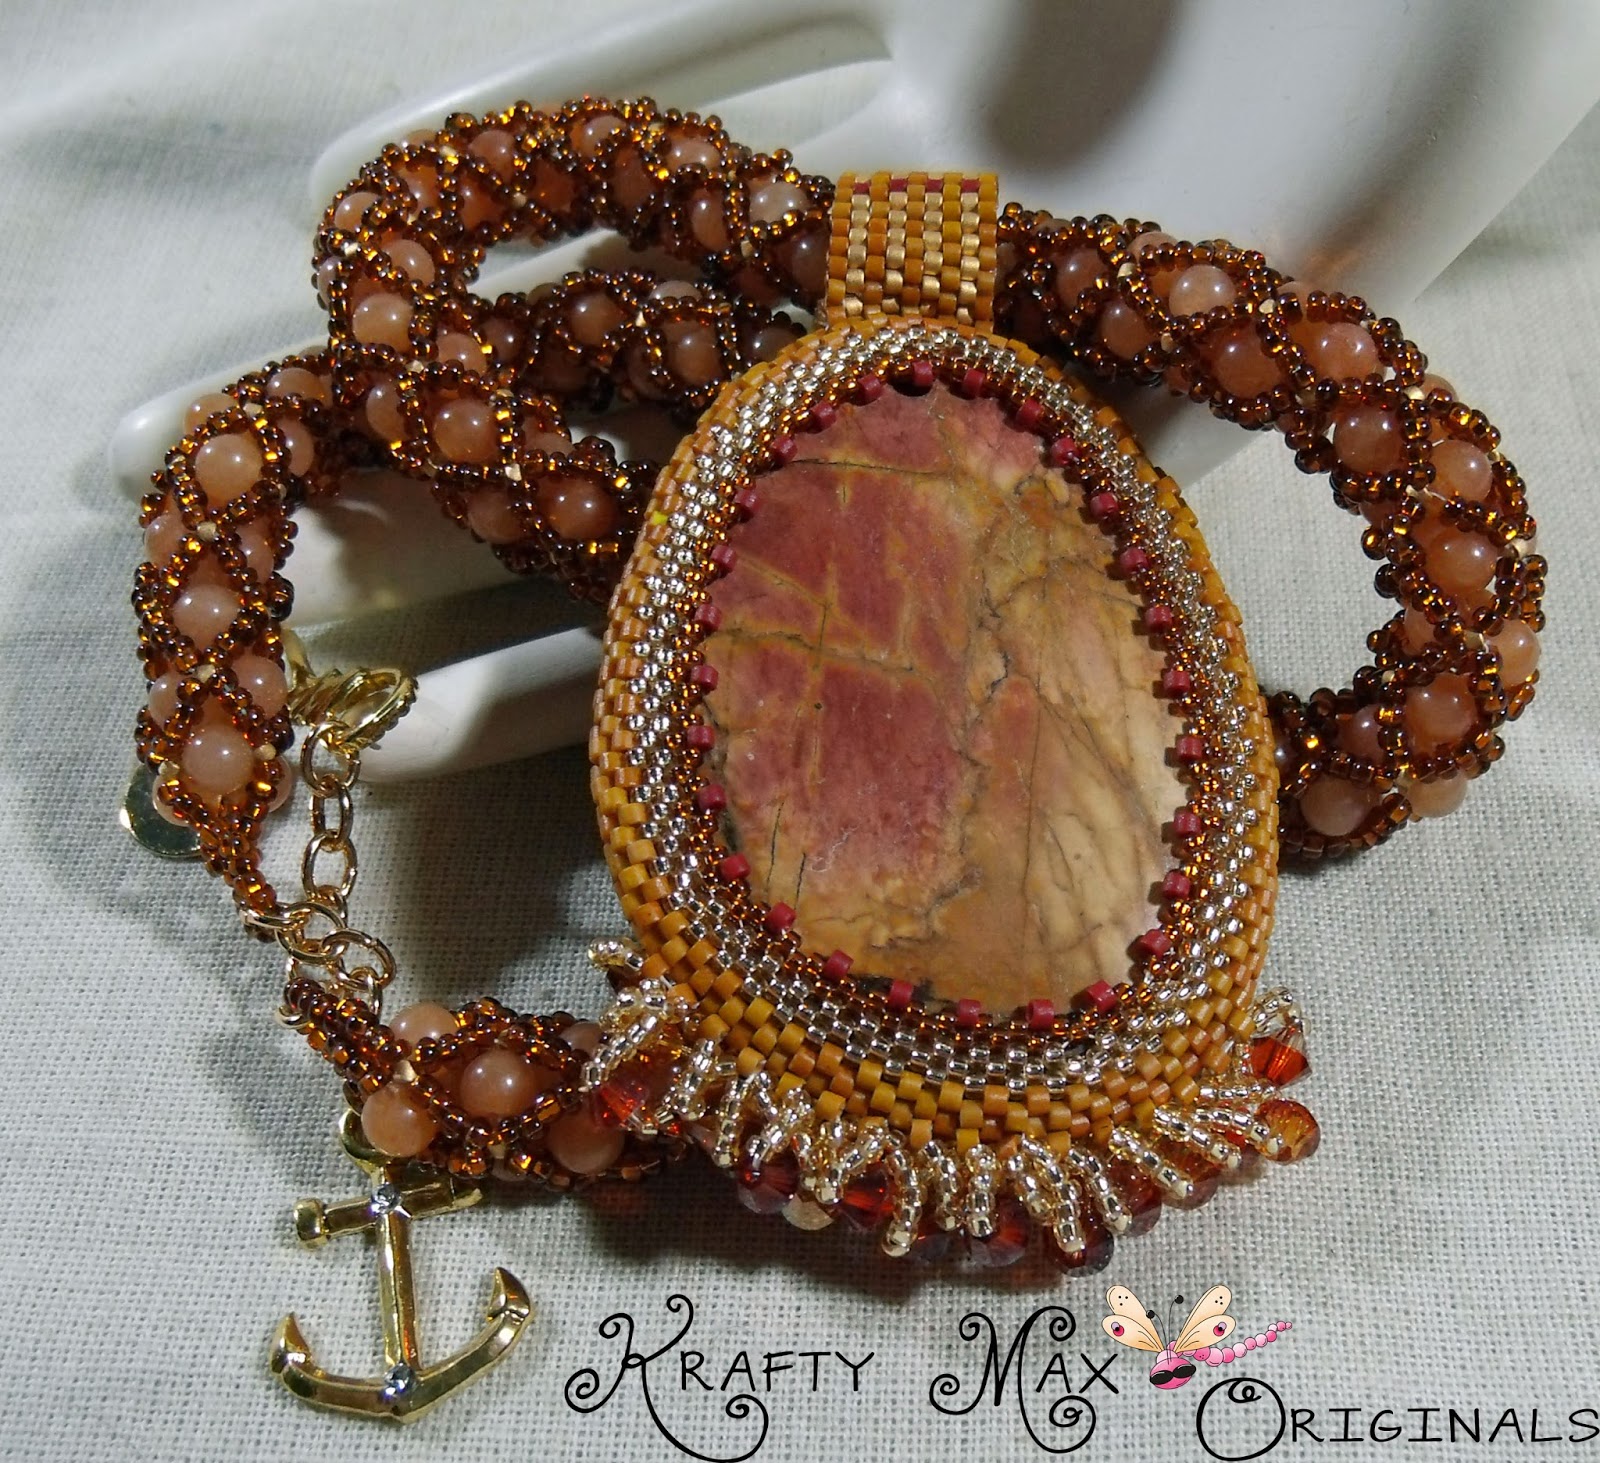 Sunset in Fall Maple Leaf Turning Colors Handmade Beadwoven Necklace 